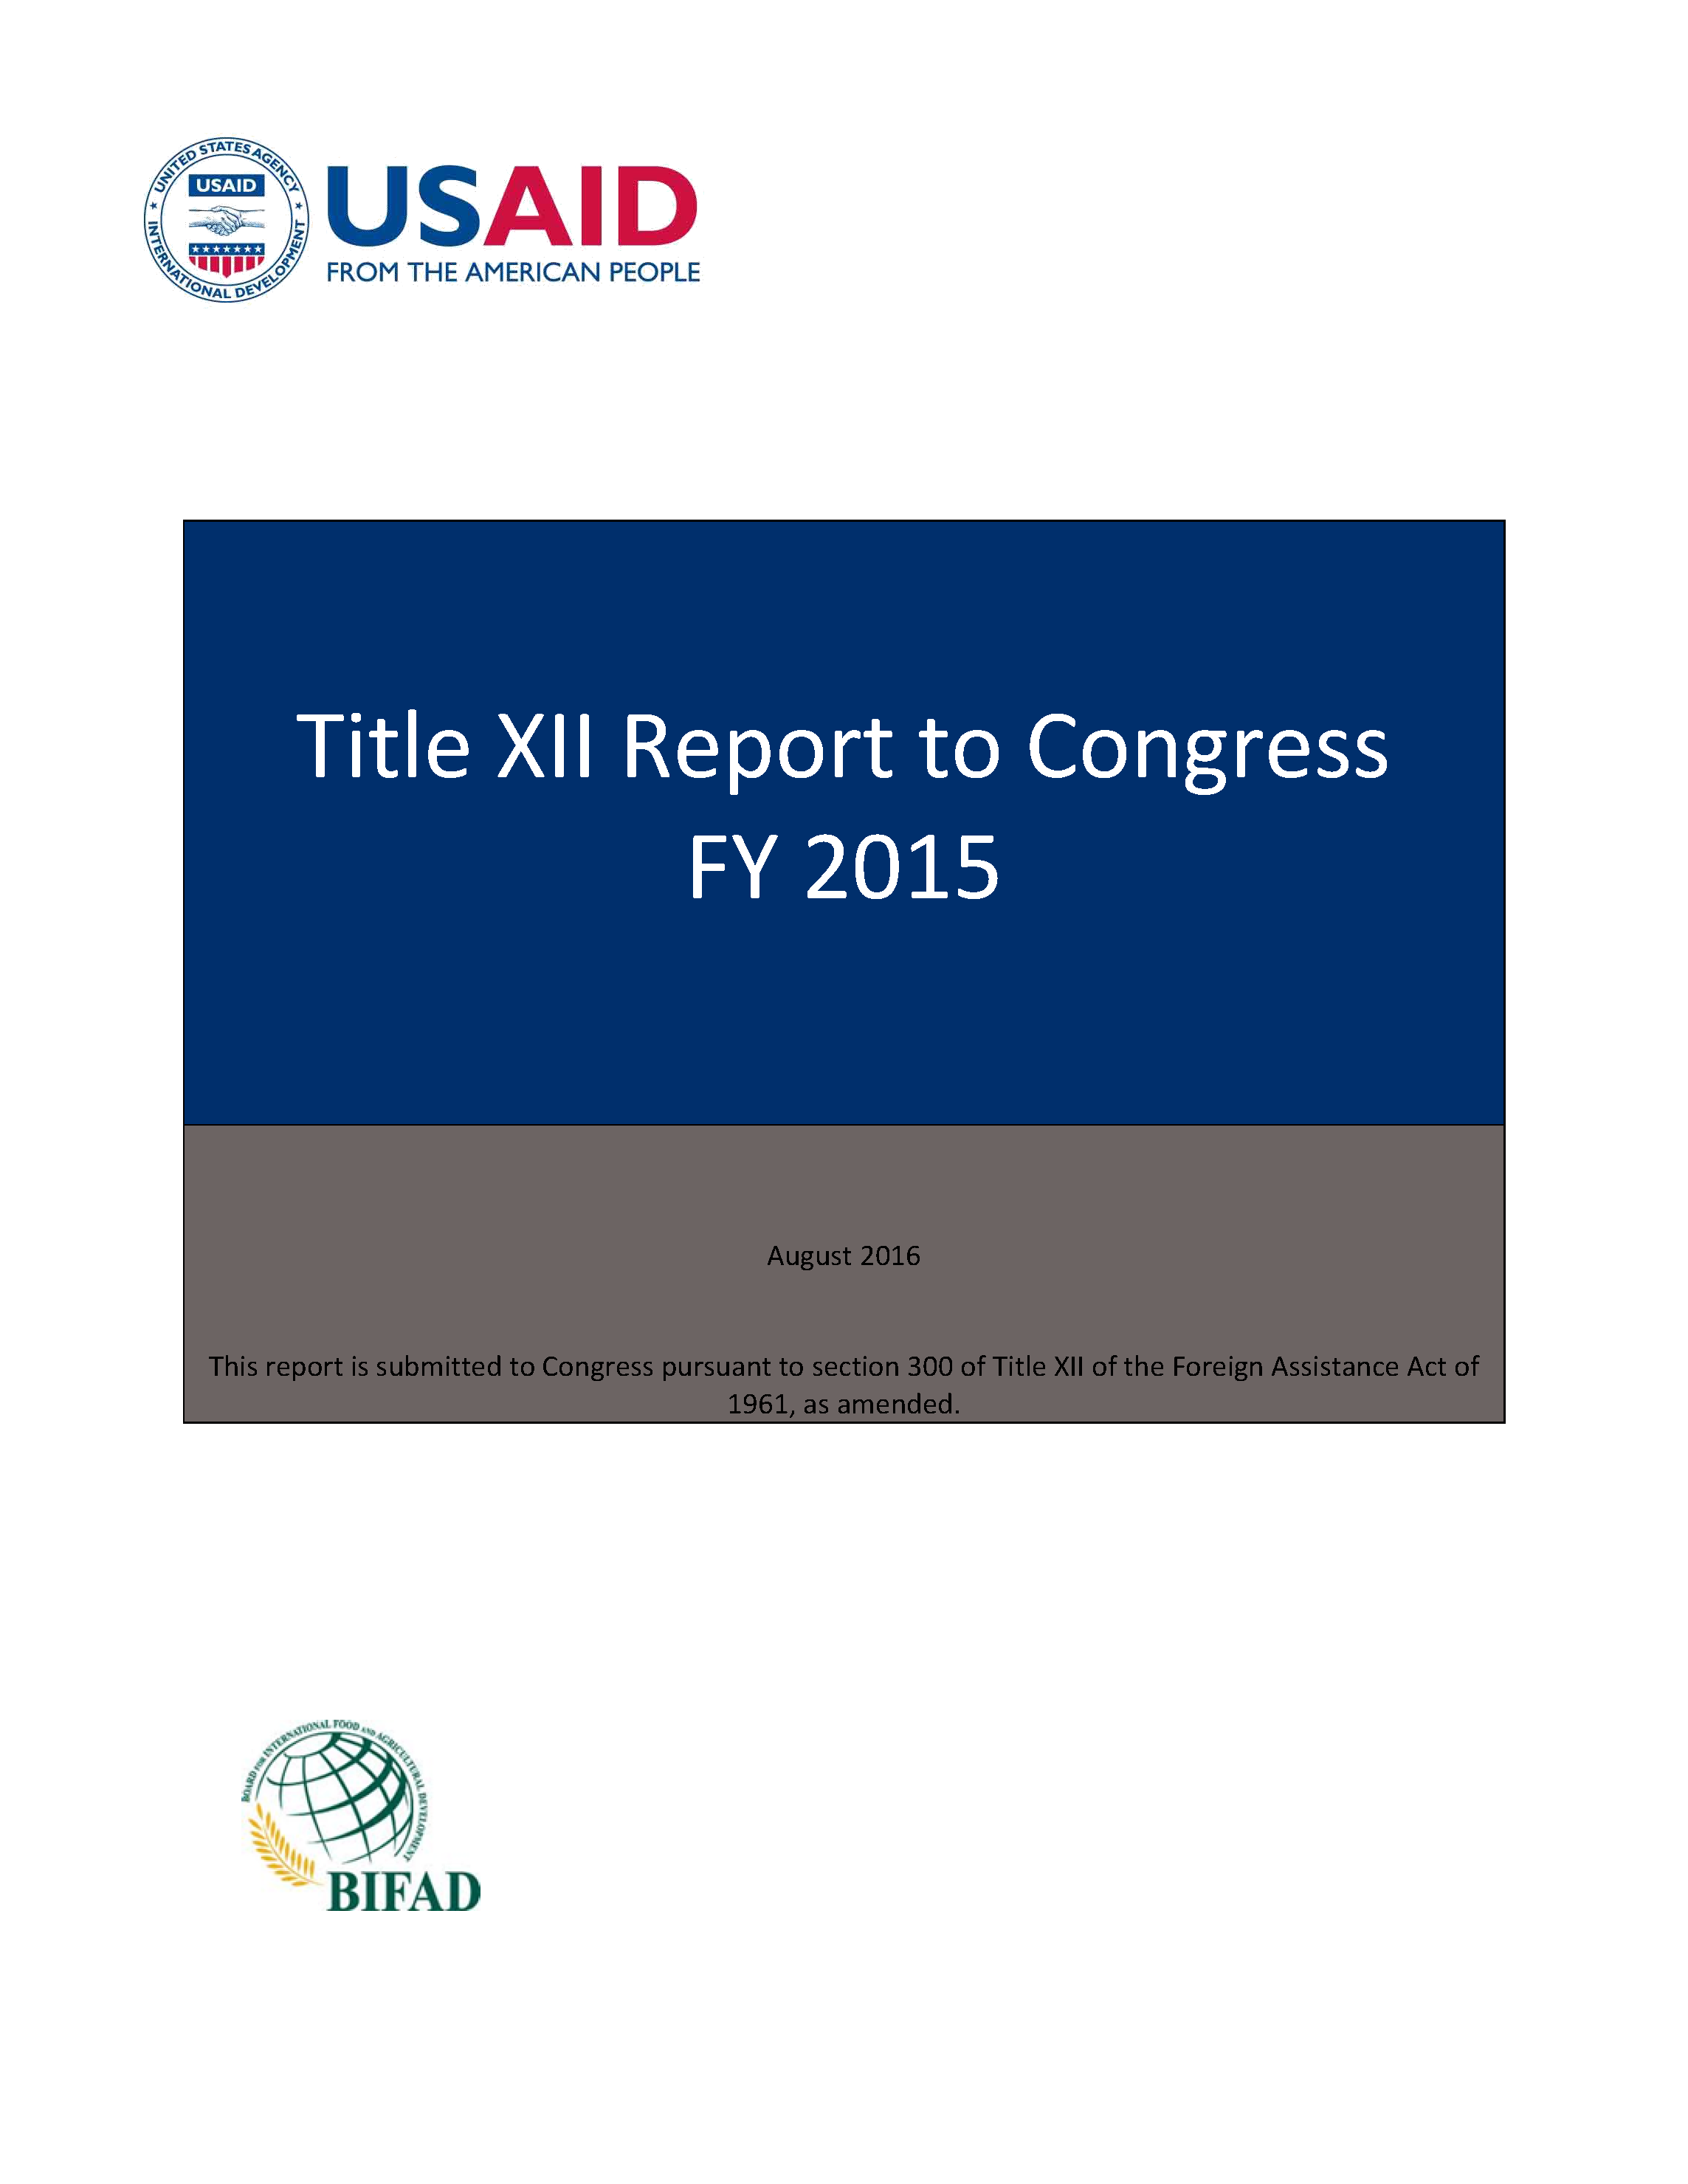 Title XII Report to Congress for FY 2015